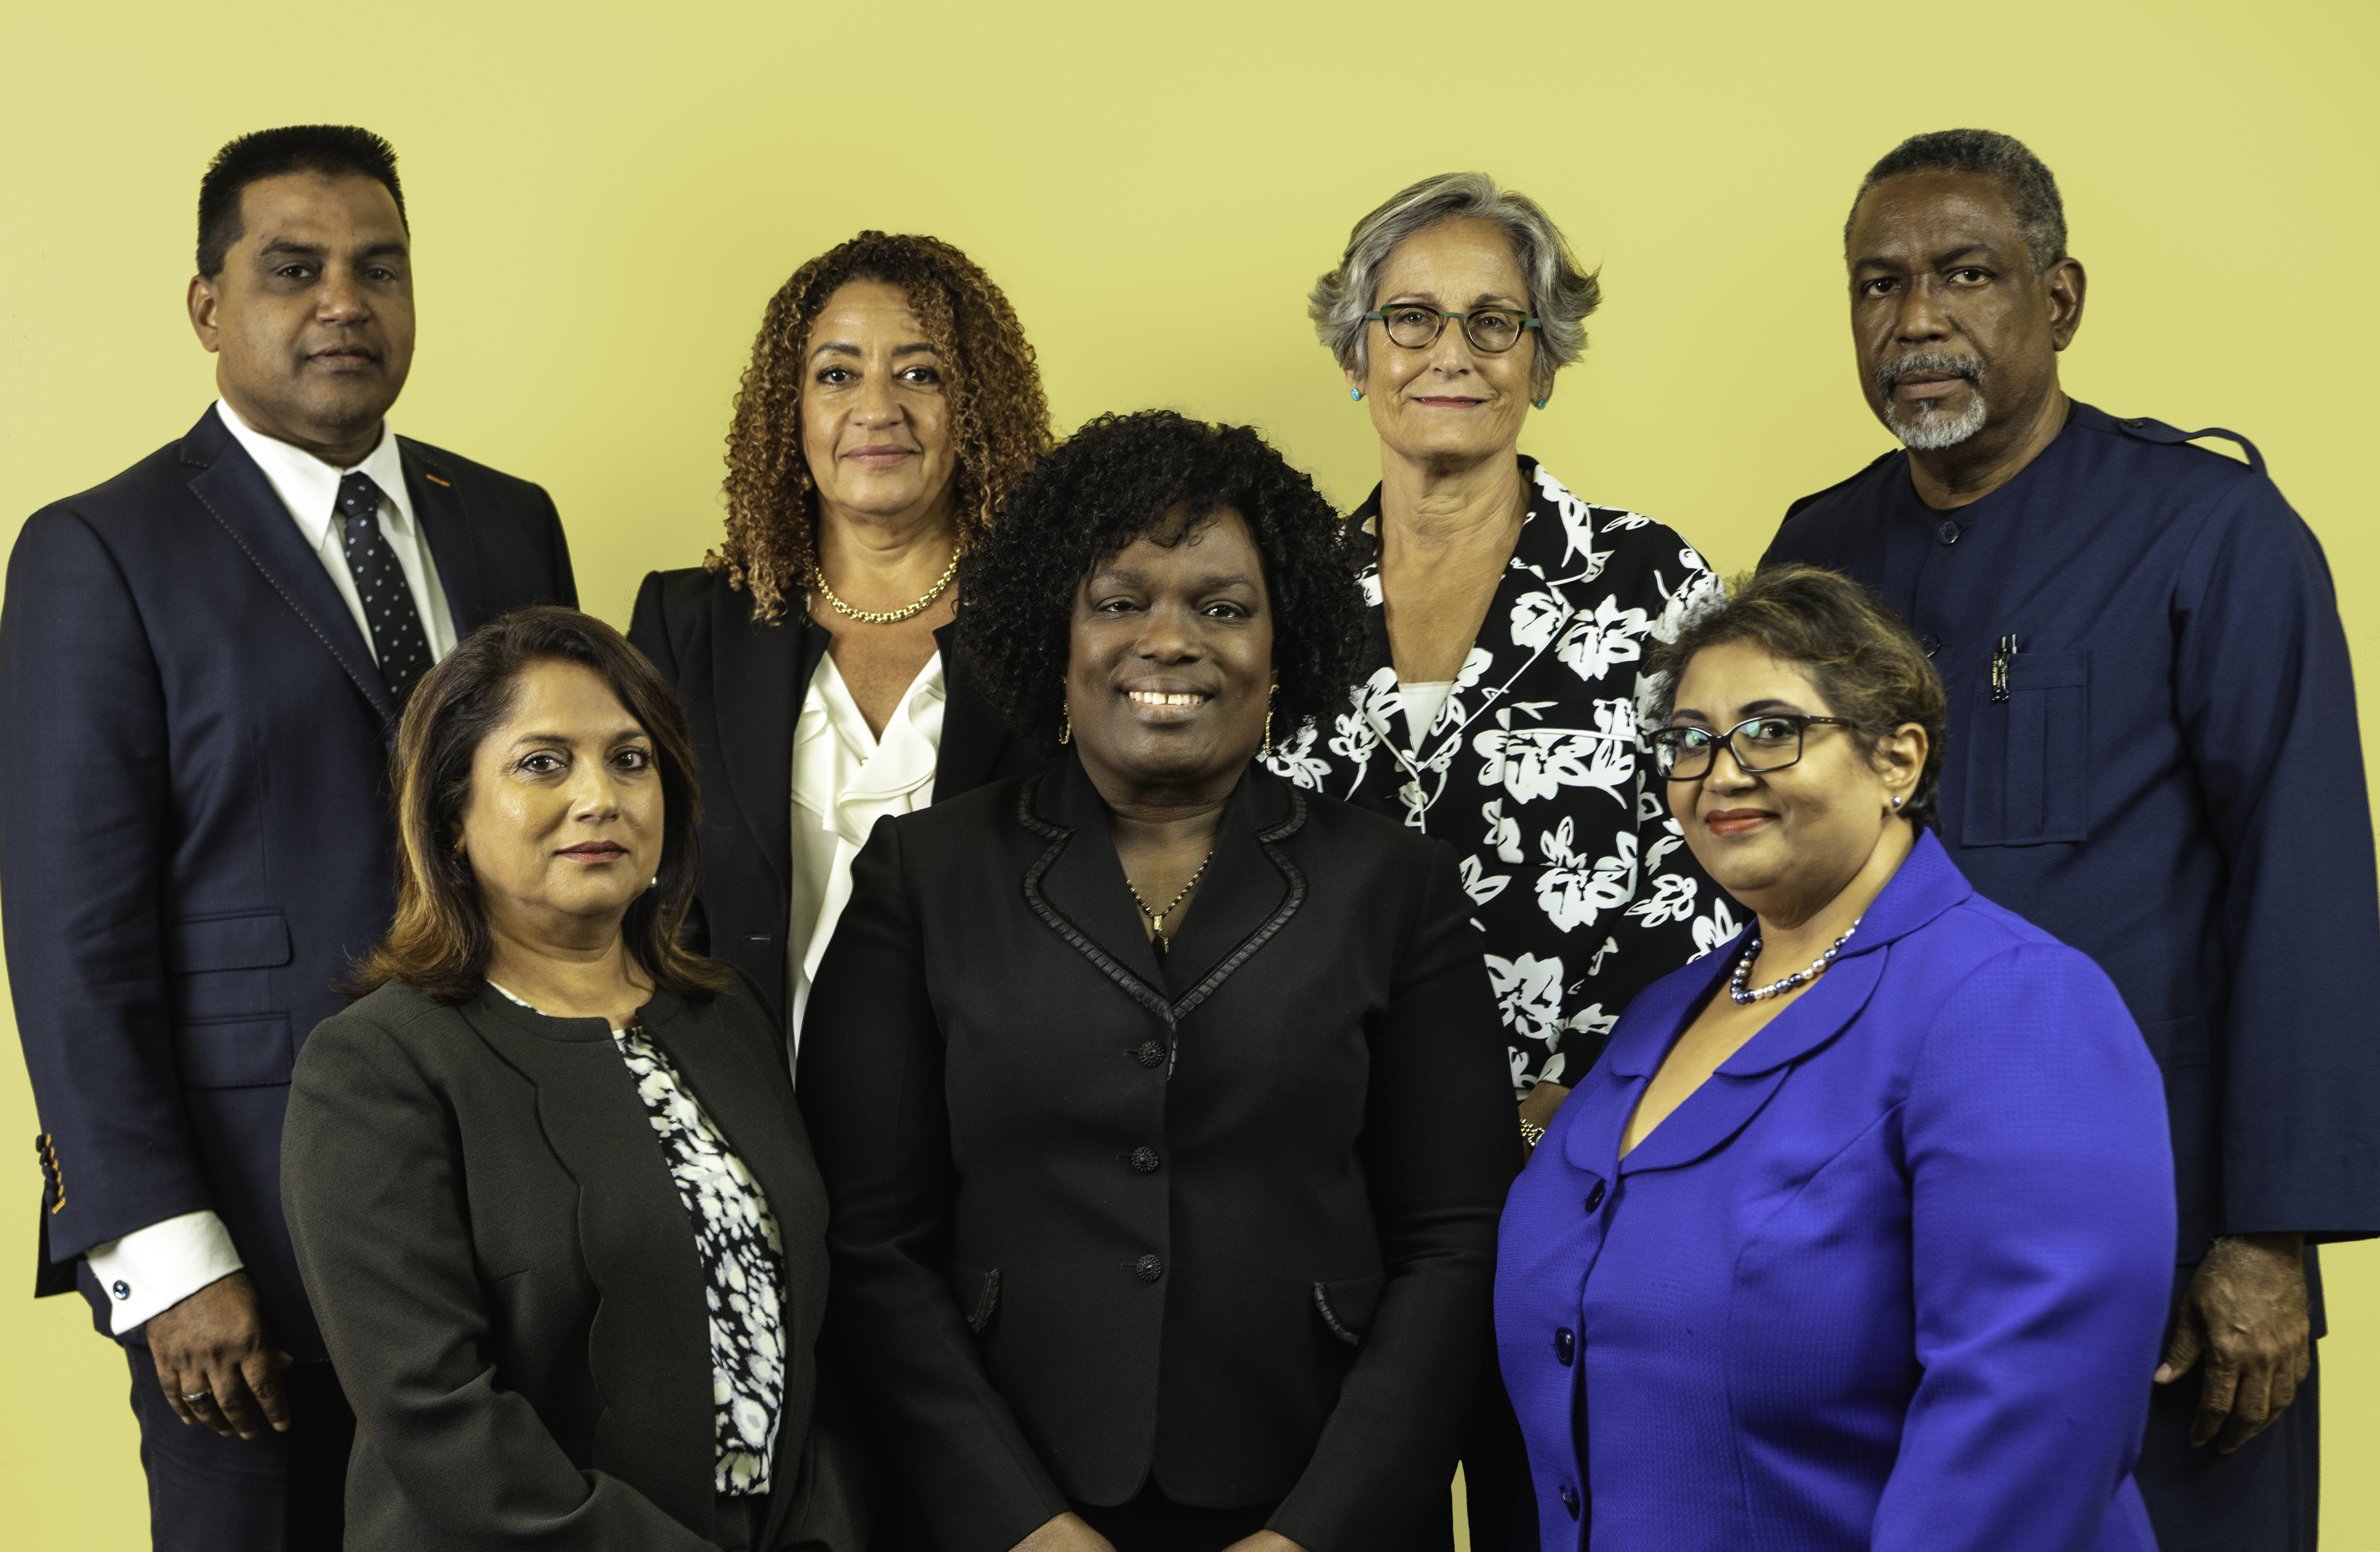 6 New Industrial Court Judges May 2019. (front row, from left) HH Mrs. Indra Rampersad-Suite, HH Mrs. Deborah Thomas-Felix, President of the Industrial Court of Trinidad and Tobago, HH Ms. Wendy Ali. (back row, from left) HH Mr. Nizam Khan, HH Ms. Elizabeth Solomon, HH Mrs. Angela Hamel-Smith and HH Mr. Vincent Cabrera